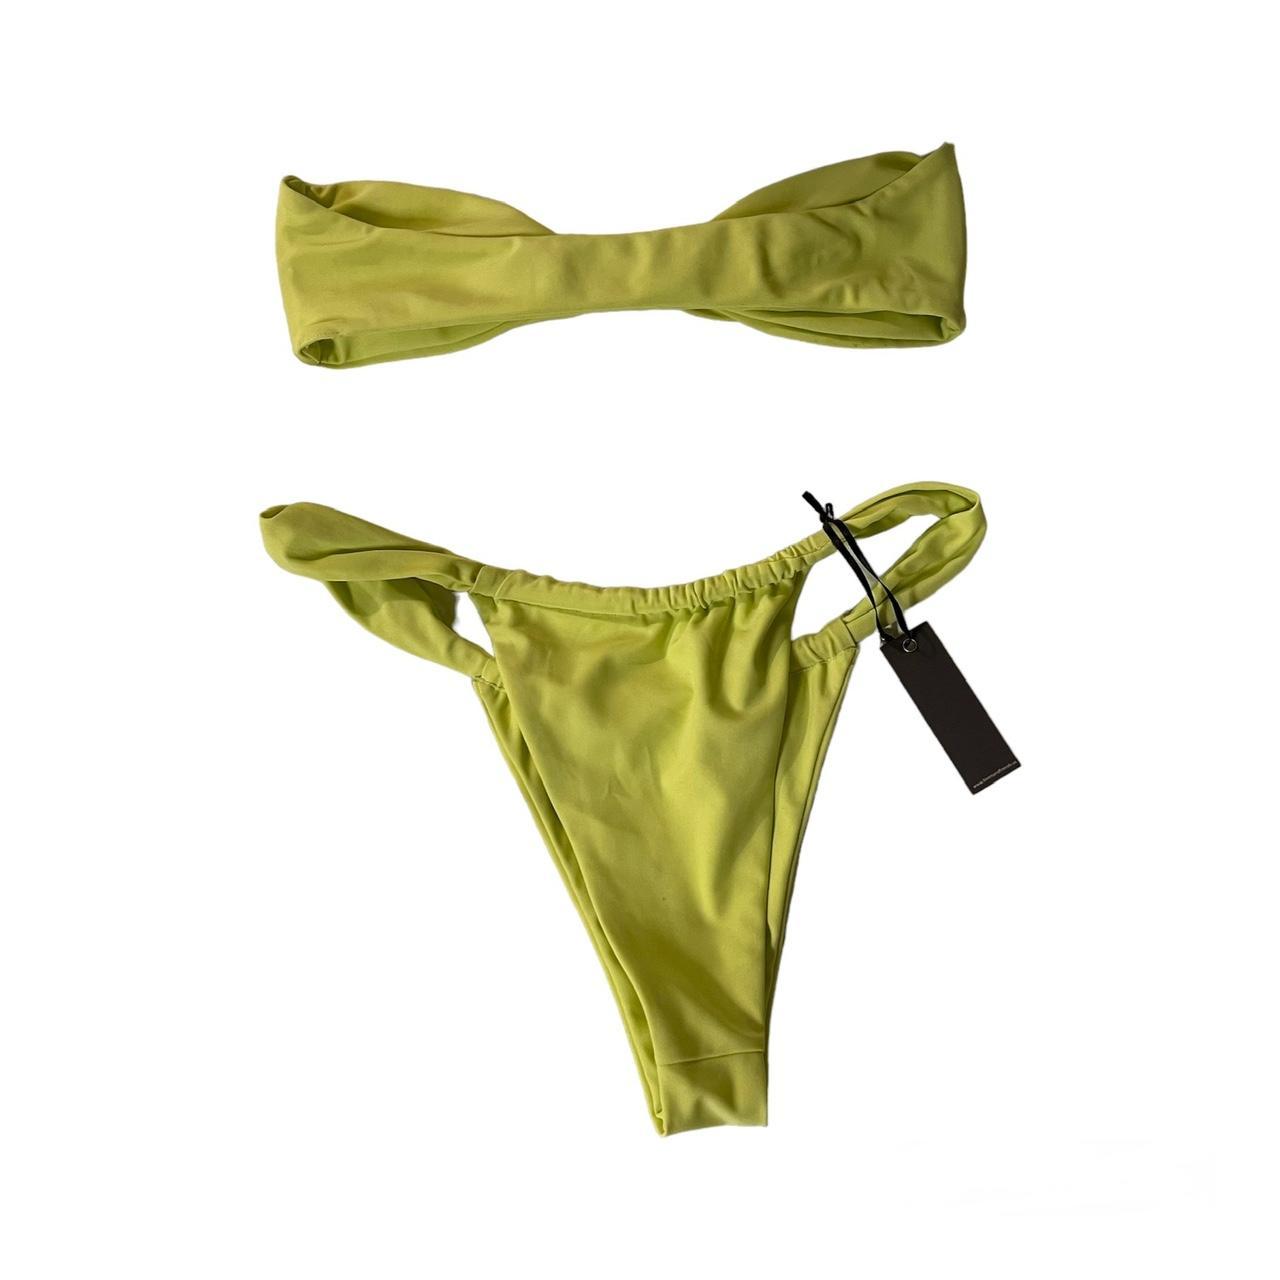 Lovers + Friends Women's Green and Yellow Bikinis-and-tankini-sets (2)